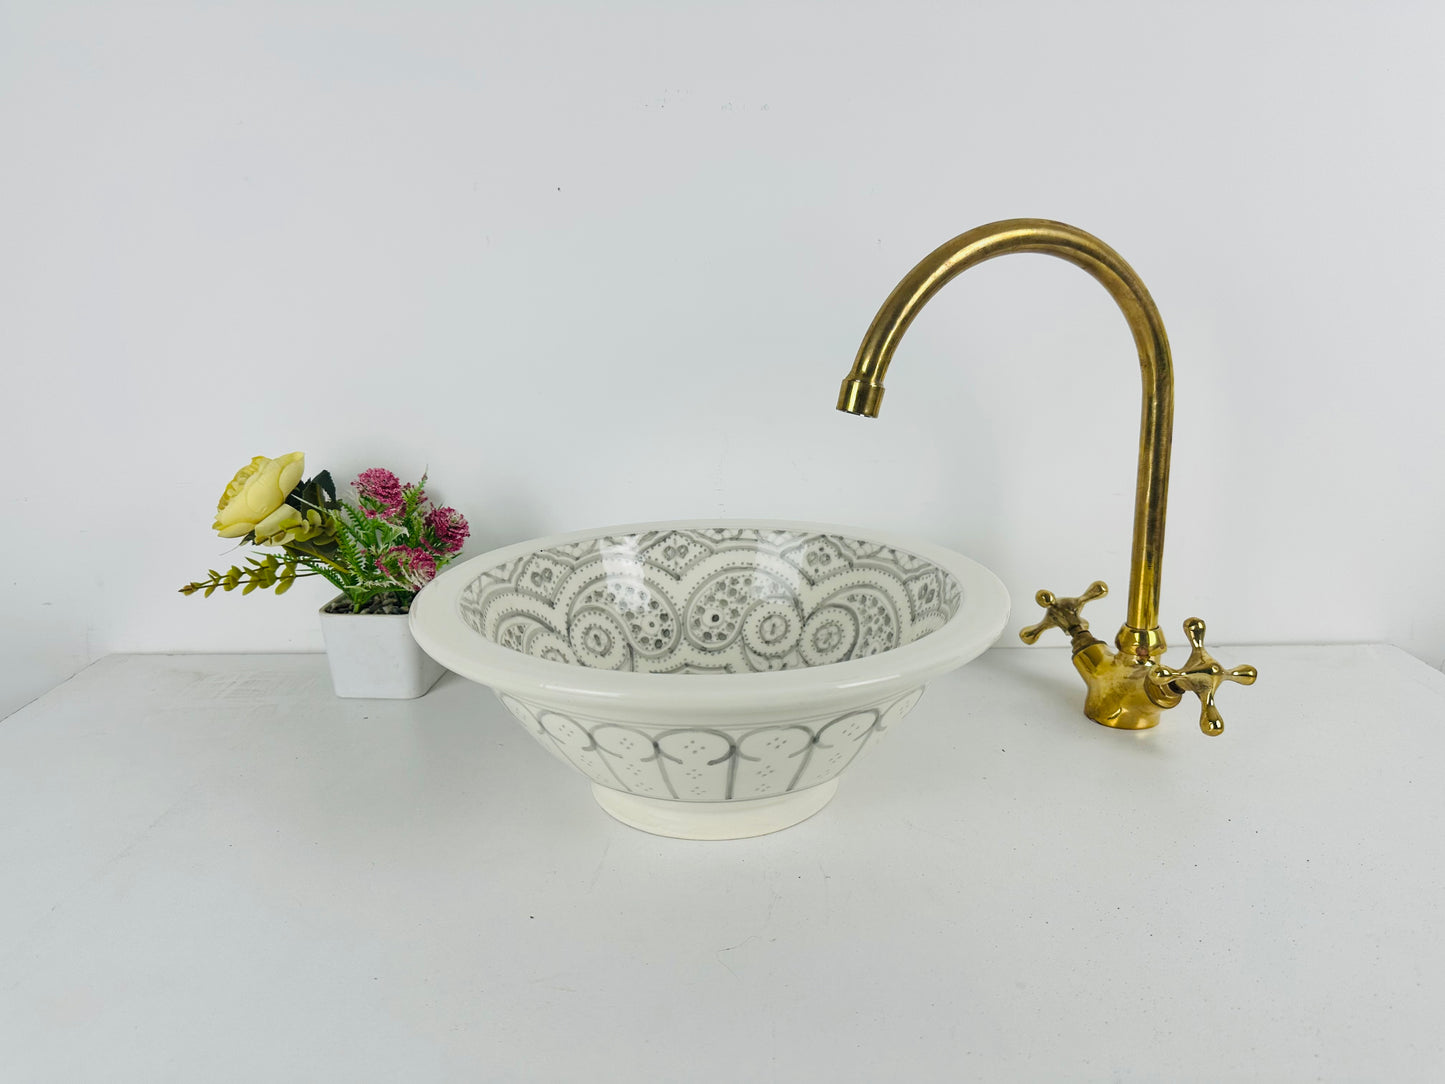 Antique Ash: Handcrafted Ceramic Sink in Vintage Gray Shade